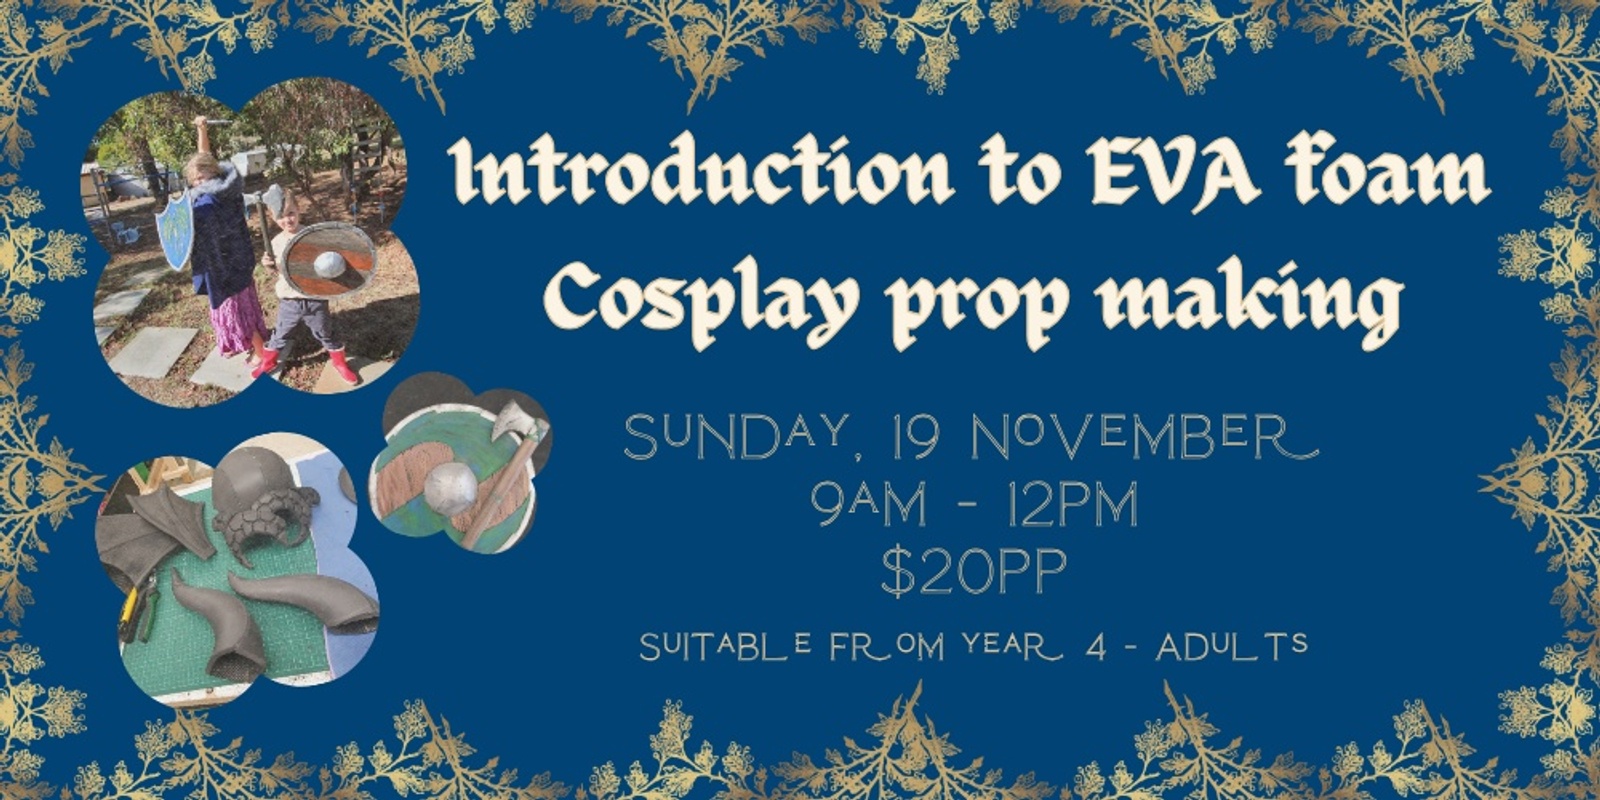 Banner image for Introduction to EVA foam cosplay prop making 